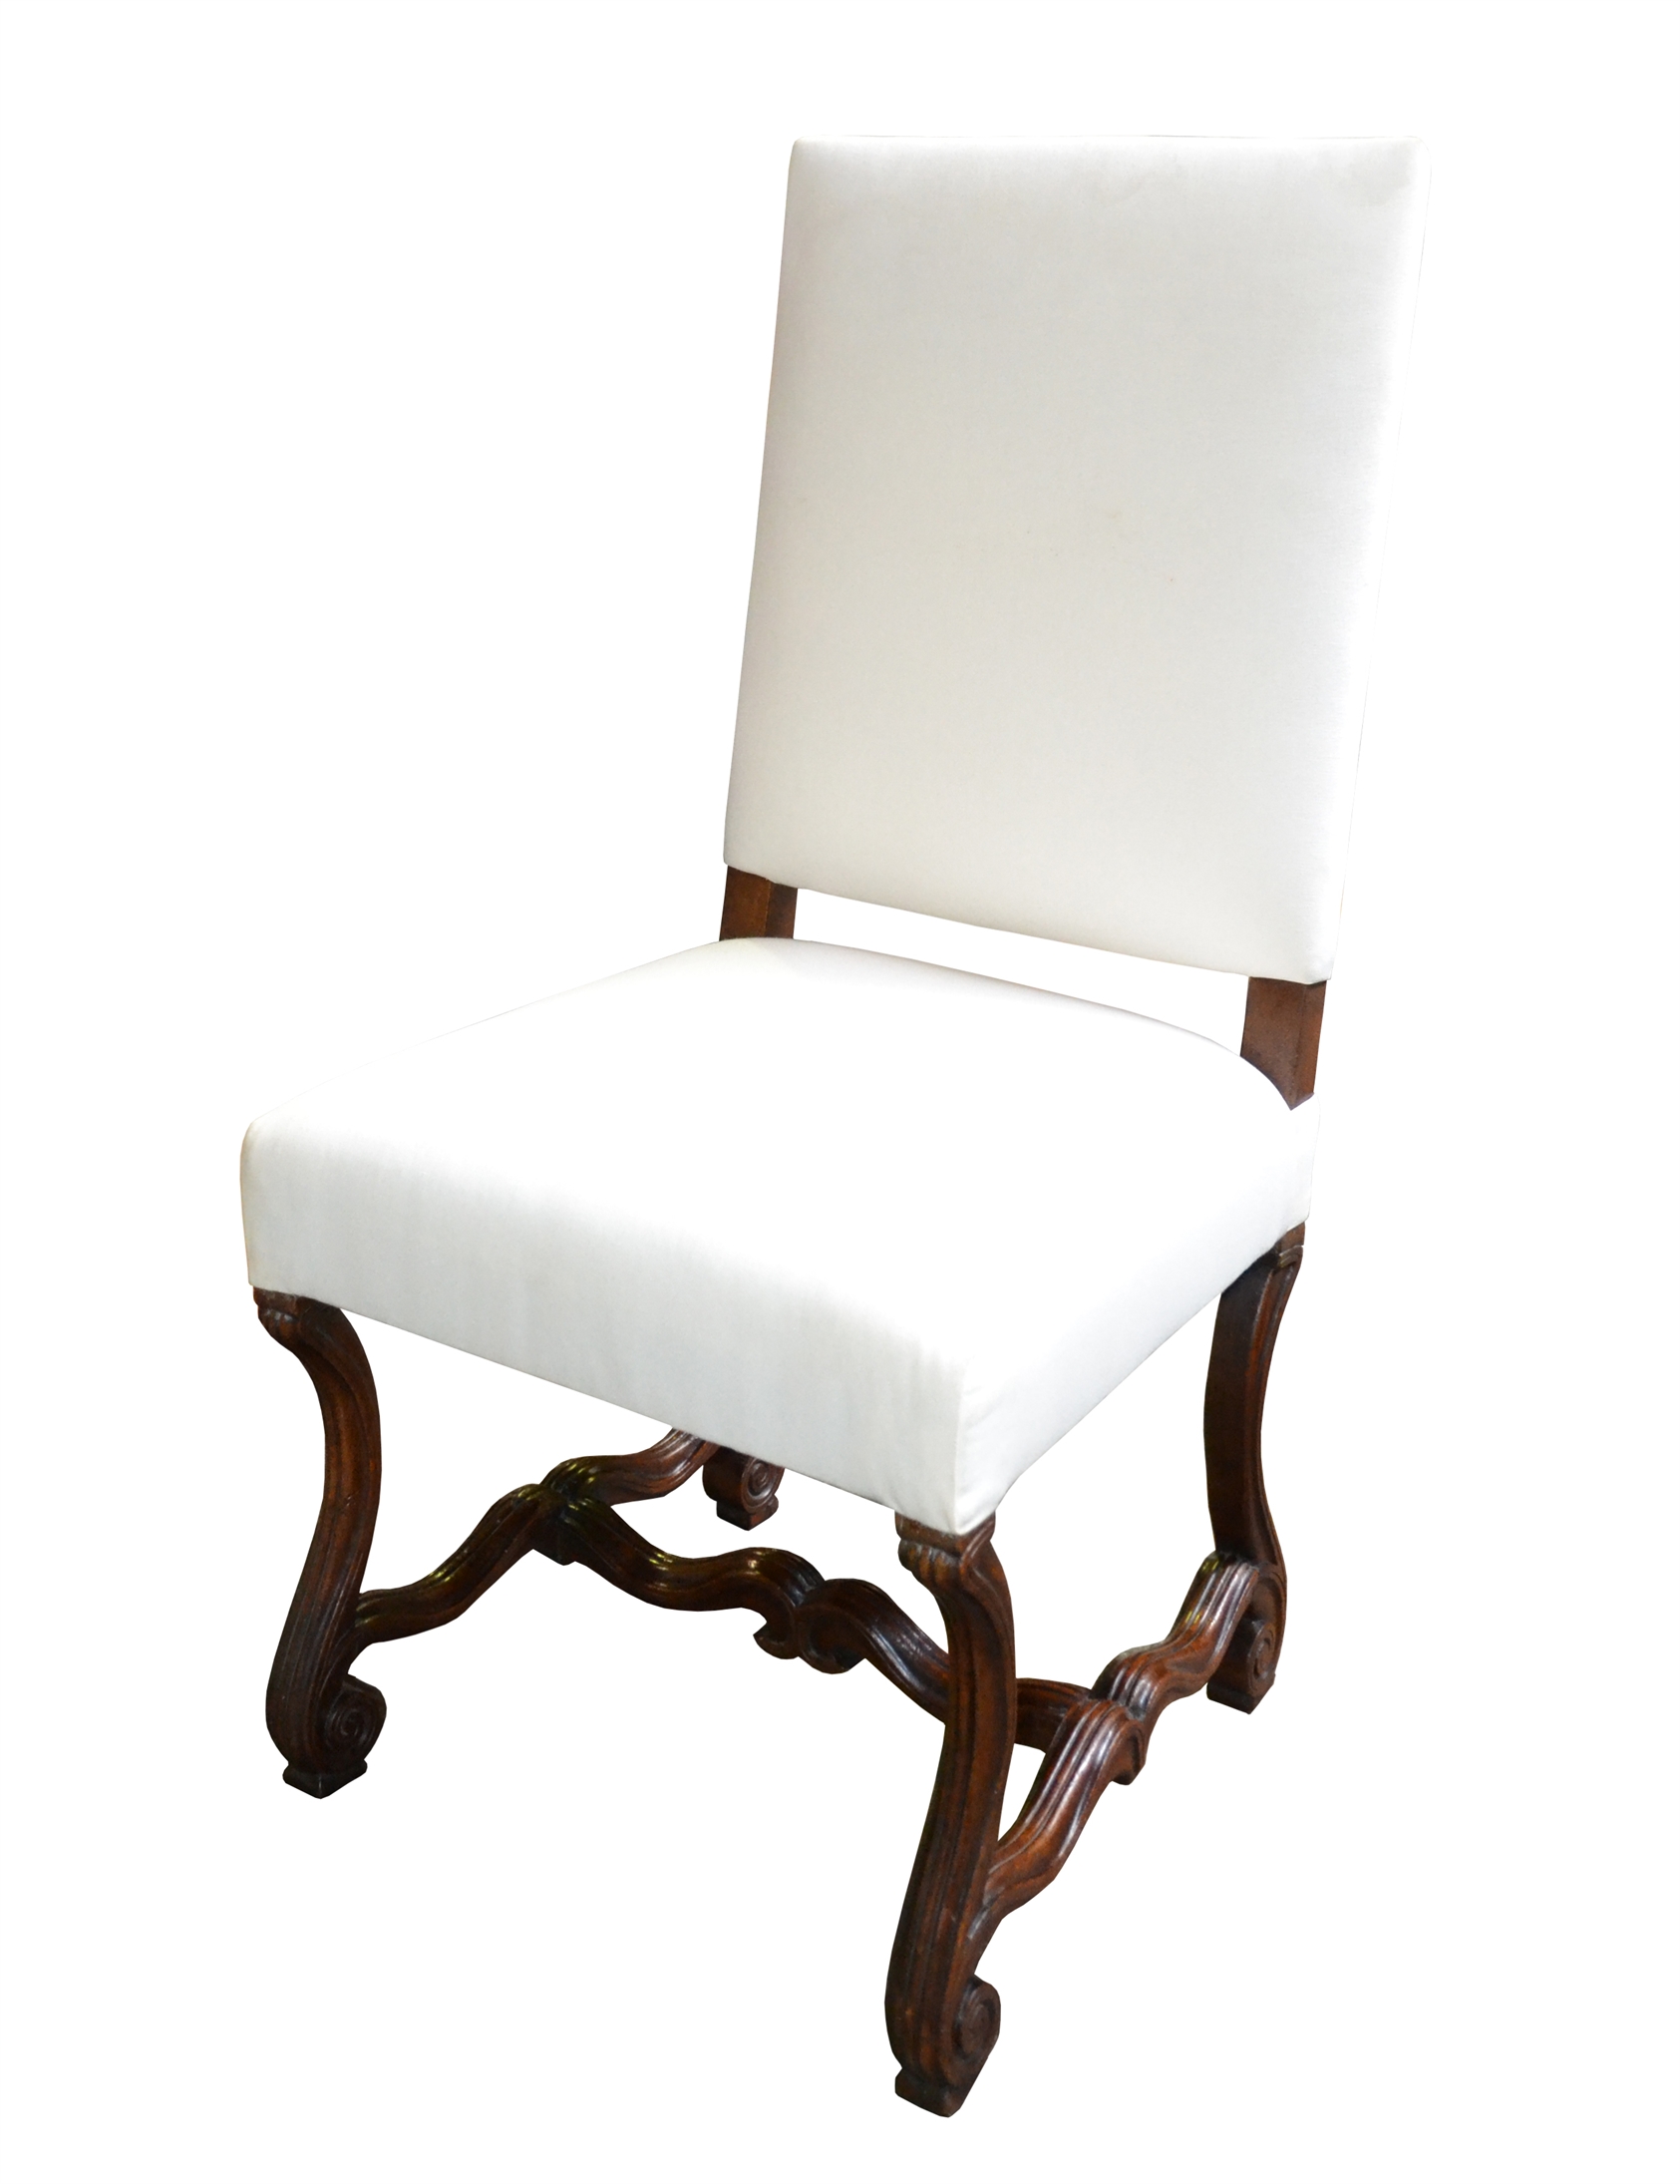 mb/1044 - Antique Poltrona Side Chair